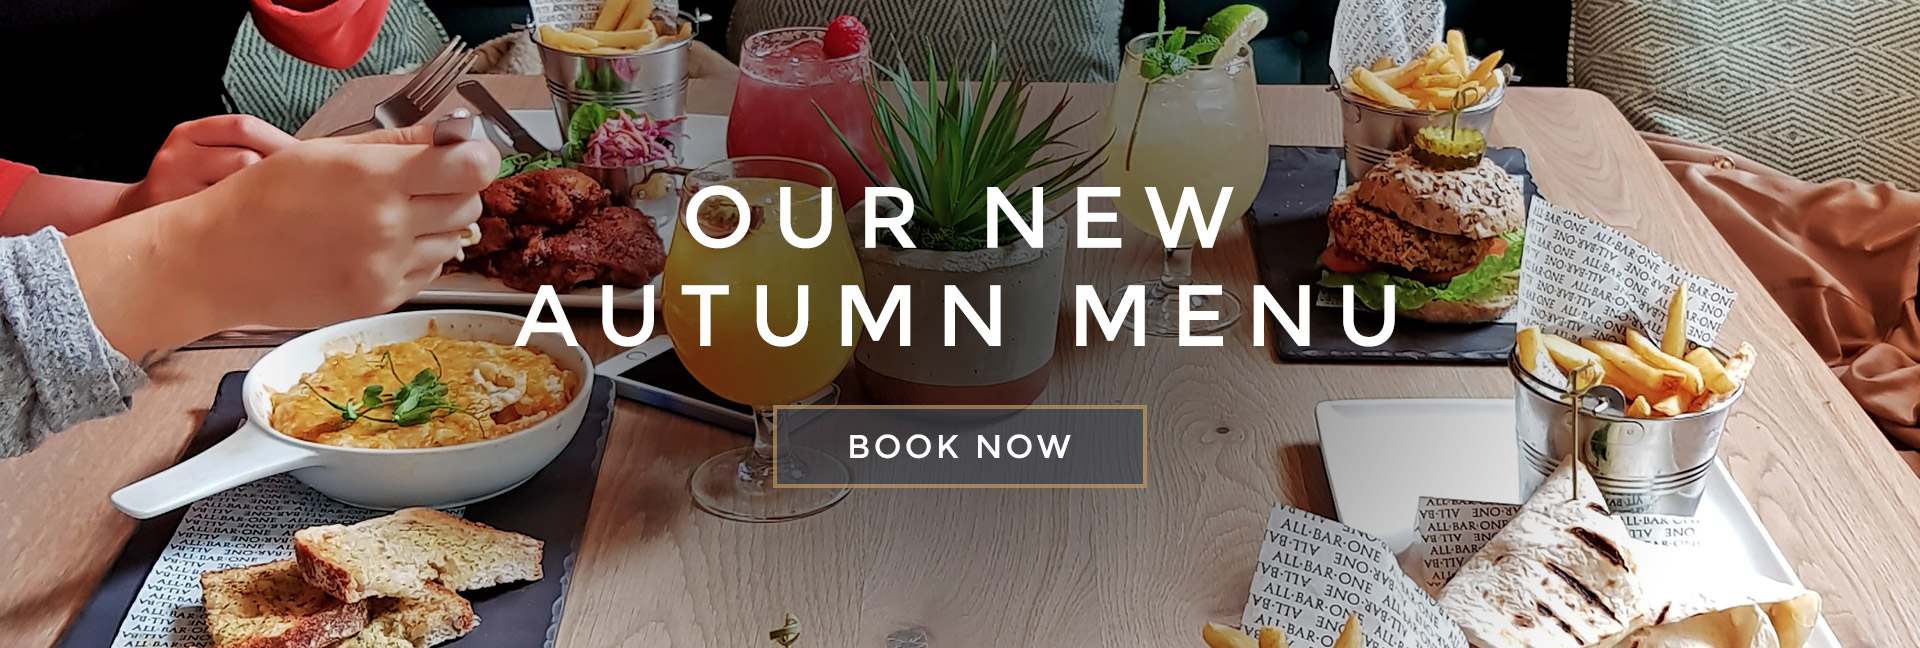 Our new Autumn menu at All Bar One Charing Cross - Book now